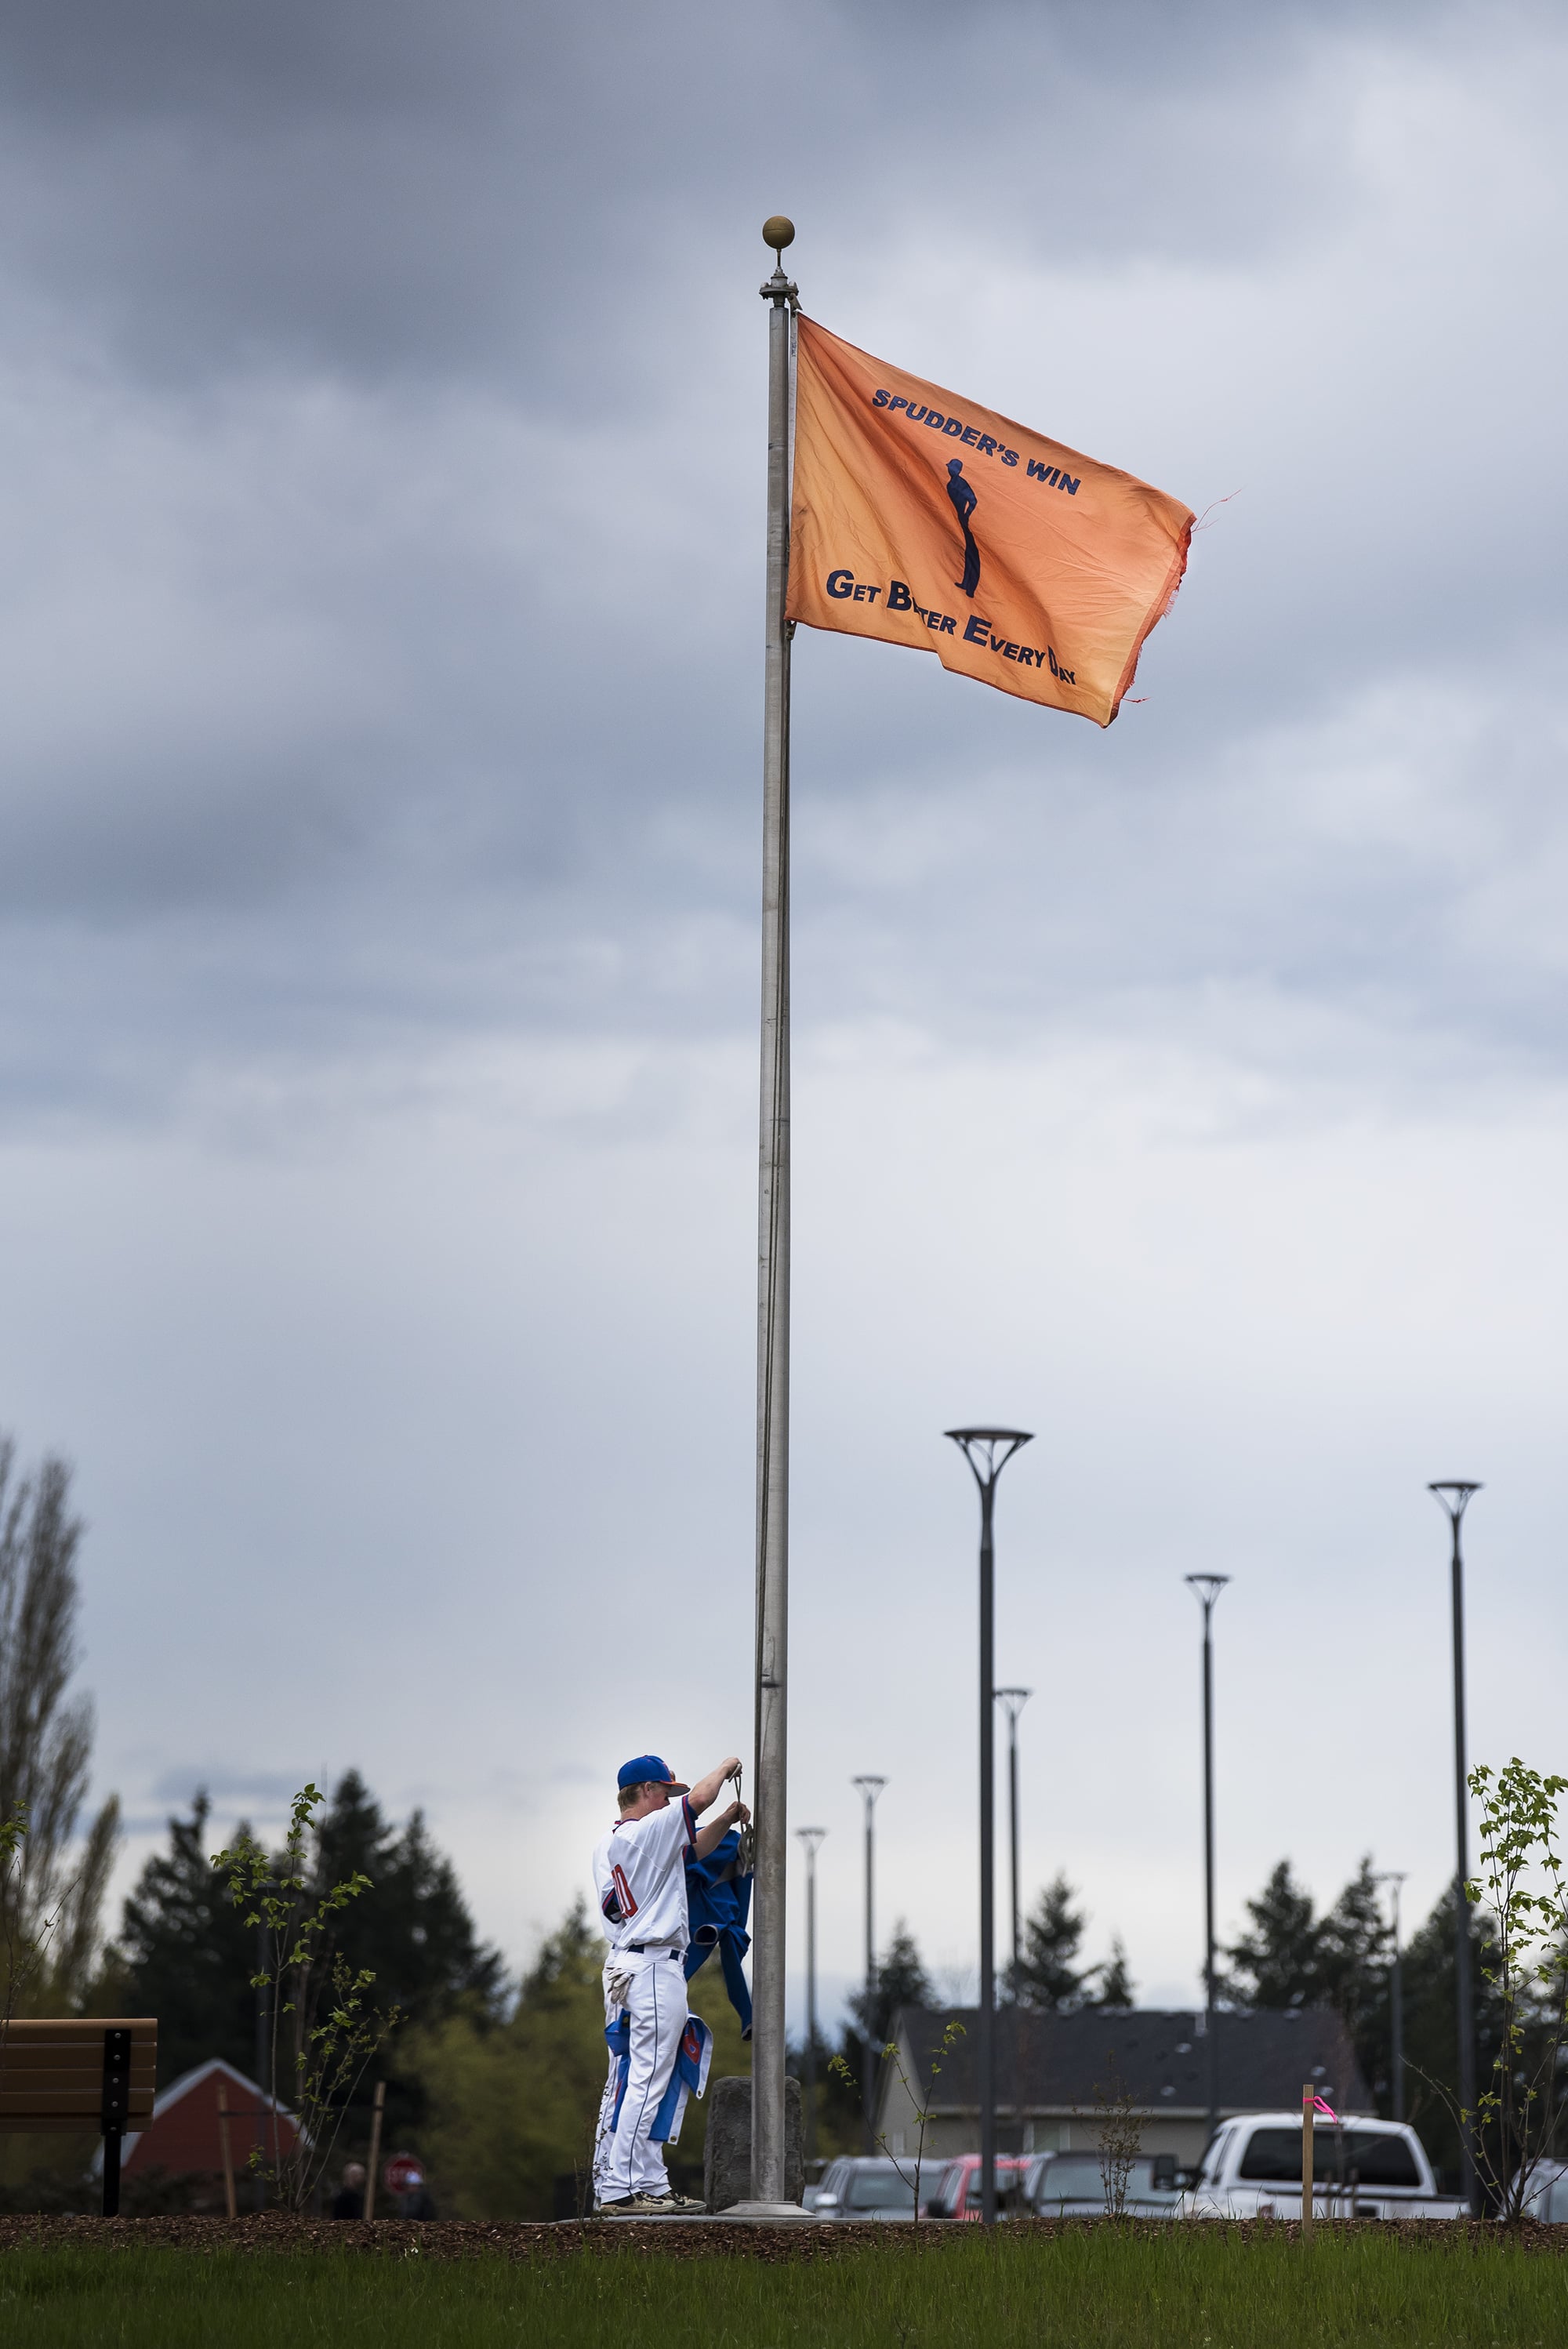 Ridgefield players raise a flag declaring a Spudders’ Victory following their win over Columbia River at the Ridgefield Outdoor Recreation Center on Tuesday night, April 16, 2019.